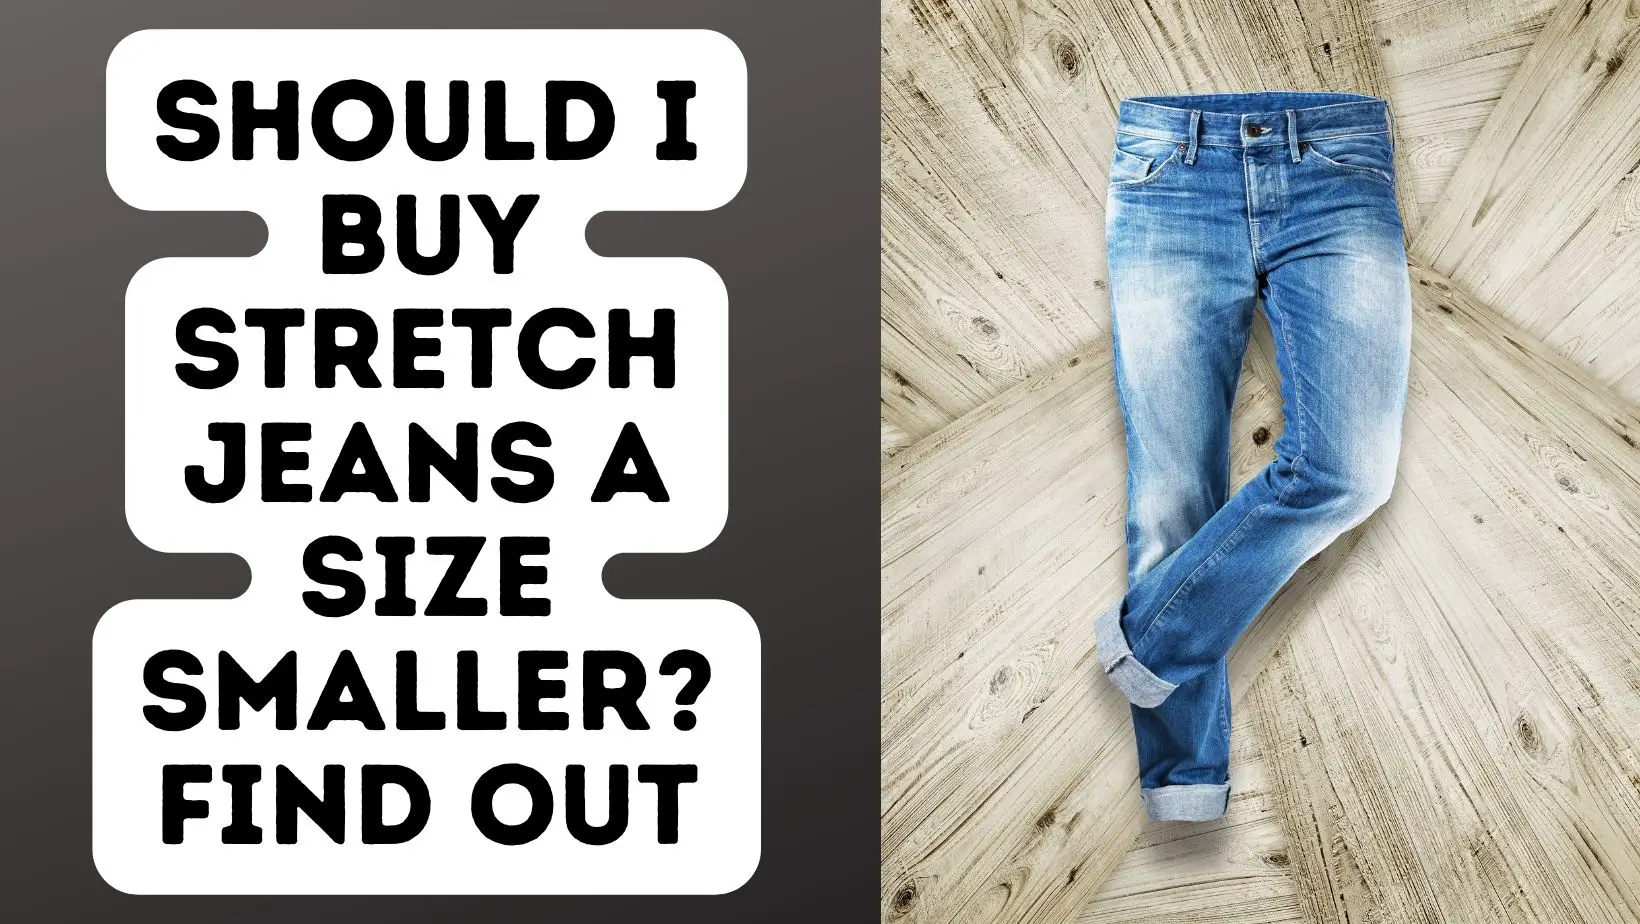 Should I Buy Stretch Jeans A Size Smaller? Find Out